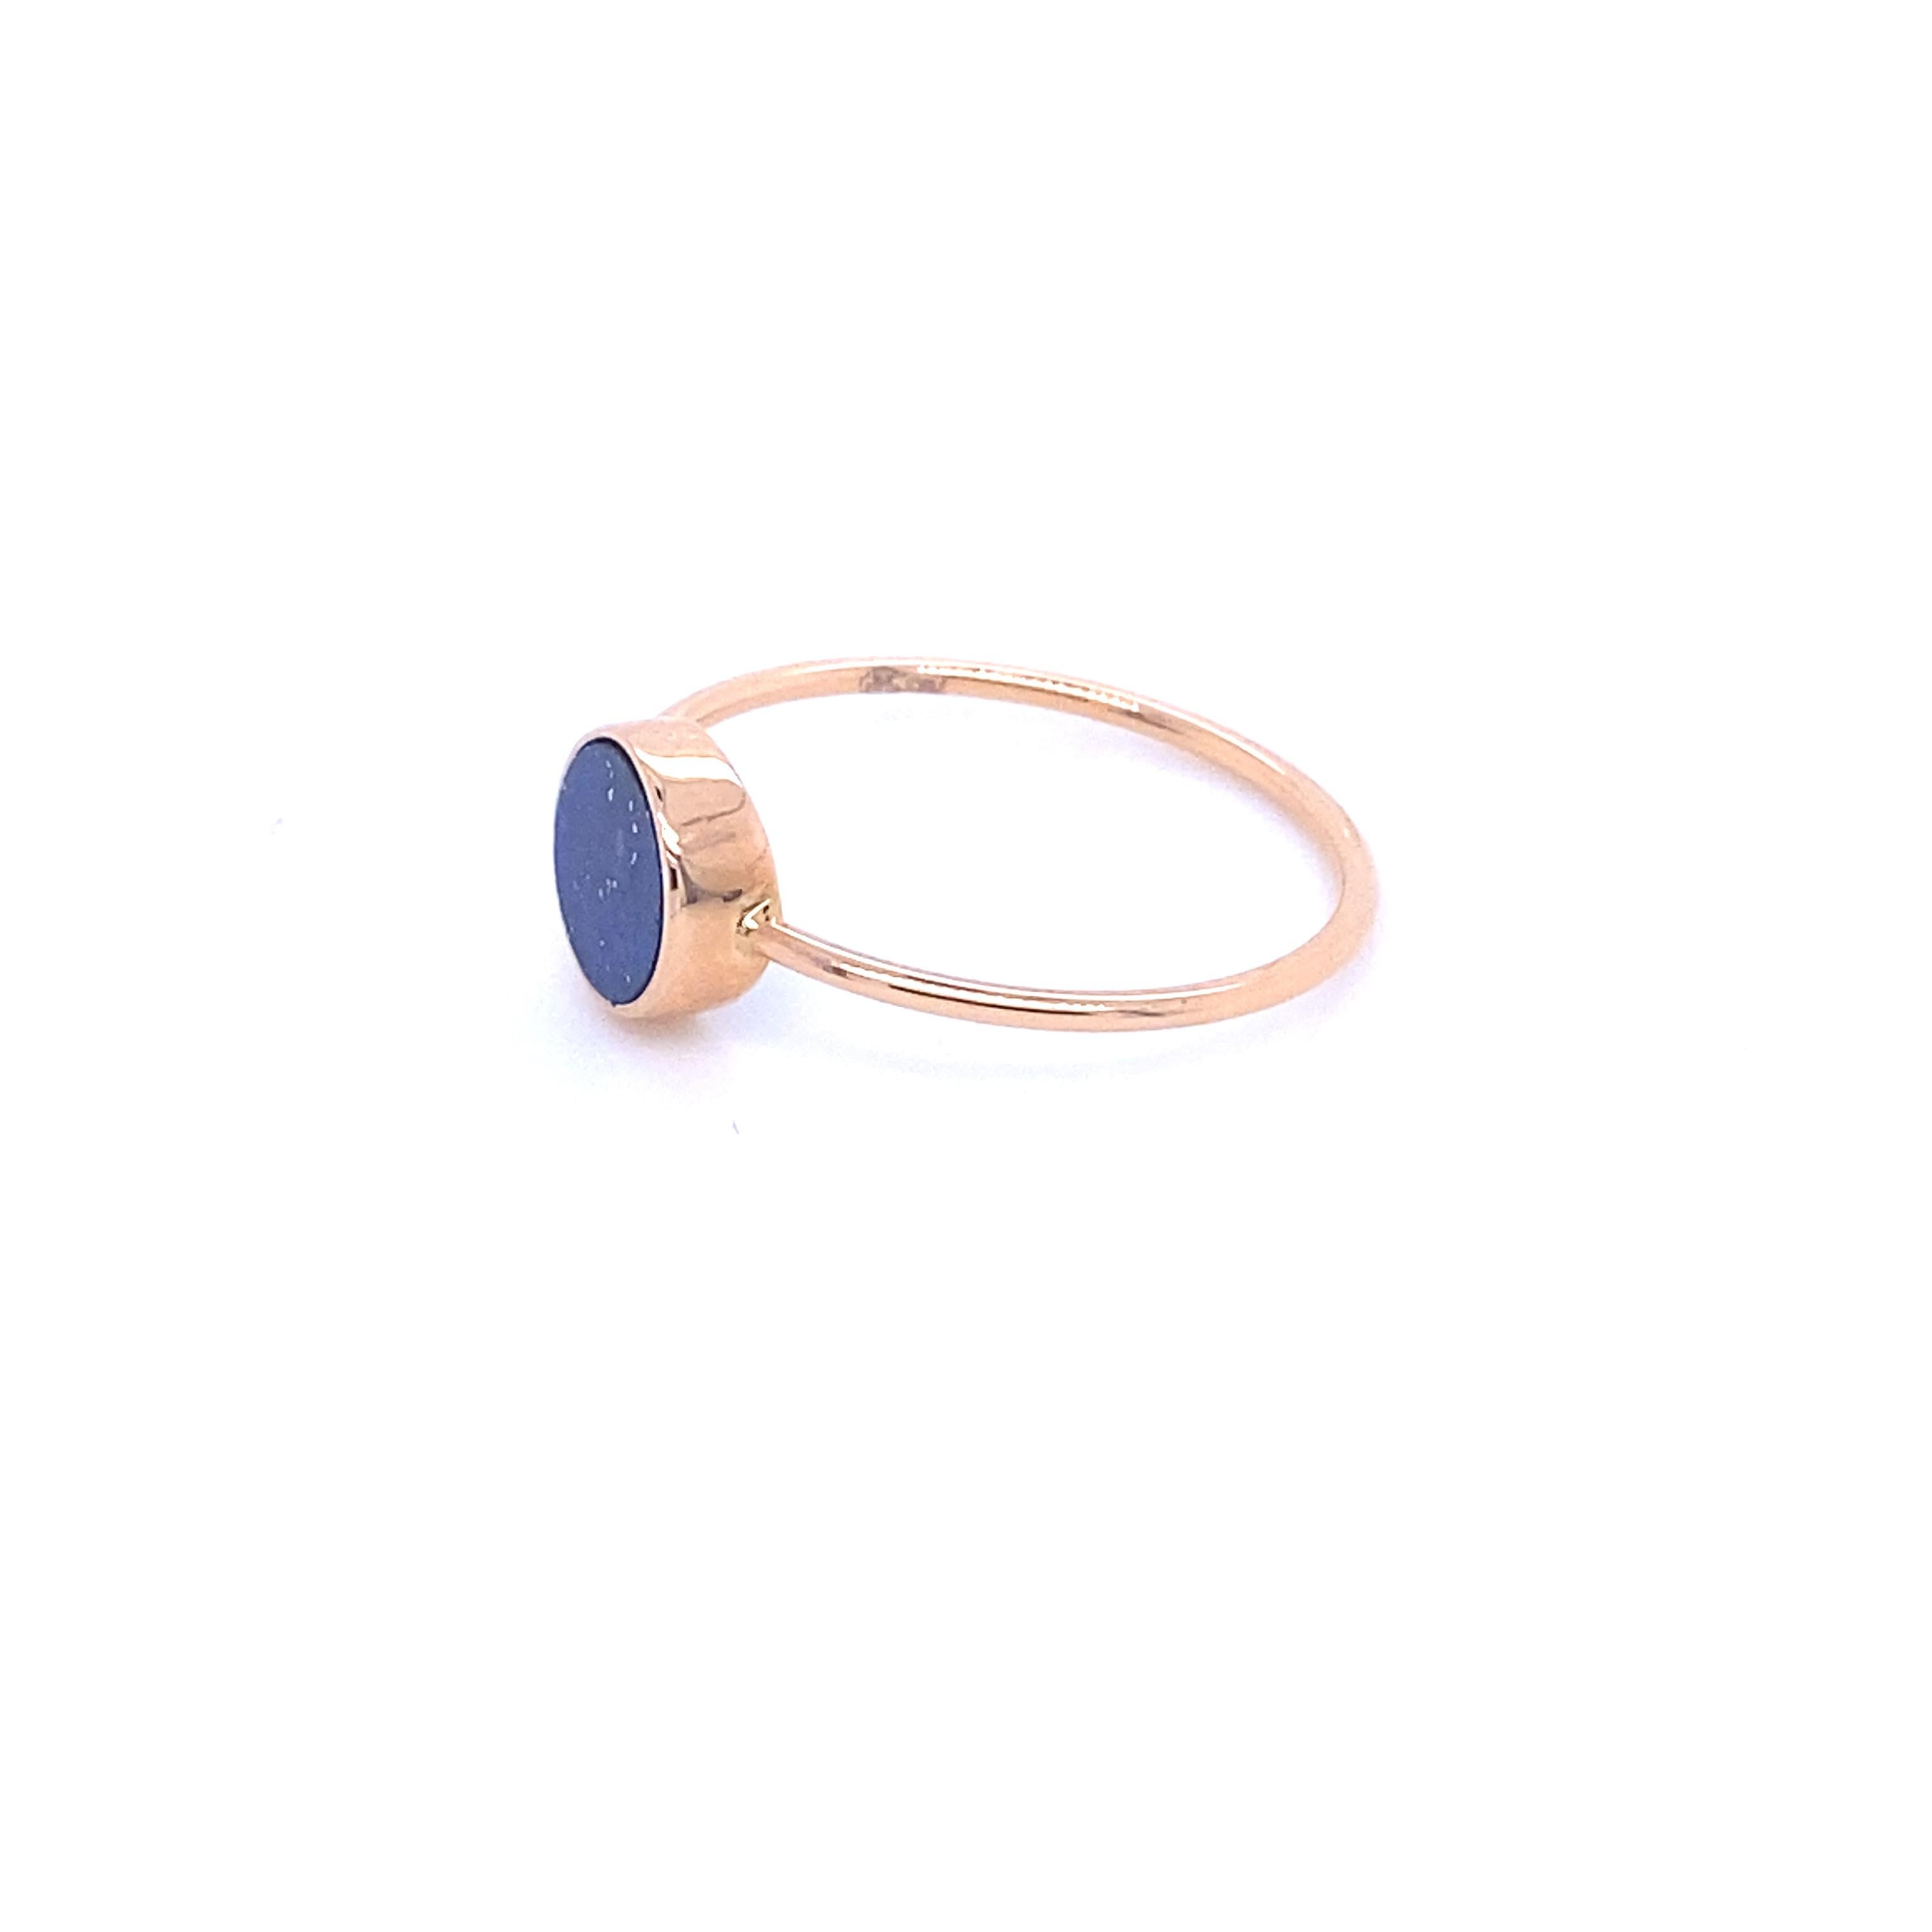 Pink Gold 18 Carat accompanied with a Lapis Lazuli Disk Ring
This Ring is a variation of natural stone and original and graphic shapes. We play with colors, we associate them, we wear them in accumulation... for a colorful life. The benefits of